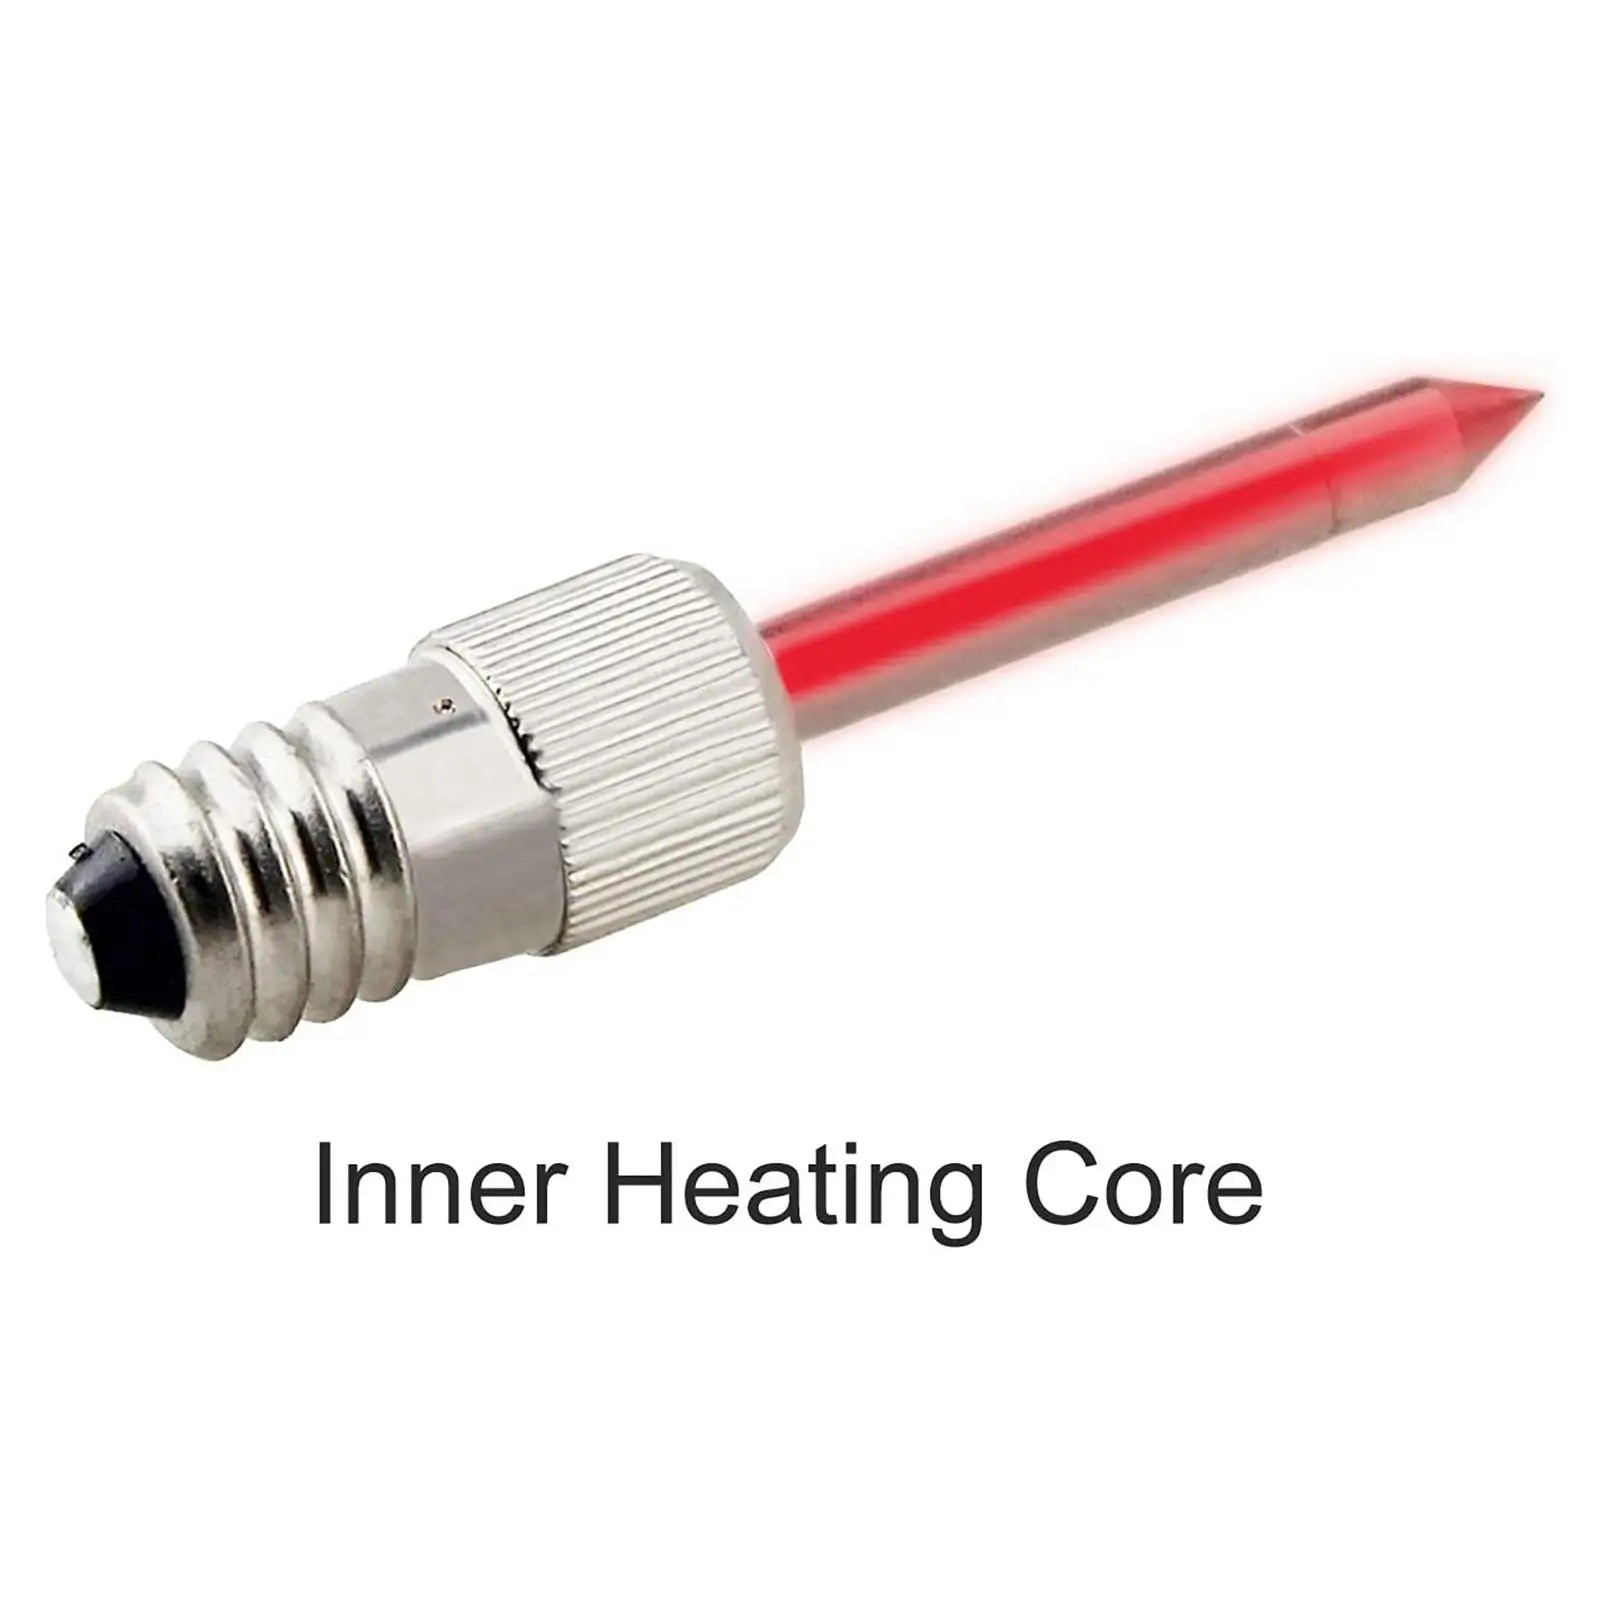 Copper Soldering Iron Tip Threaded Corrosion Resistant Sturdy USB E10 Interface Replacement Tips for Welding Rework Accessories